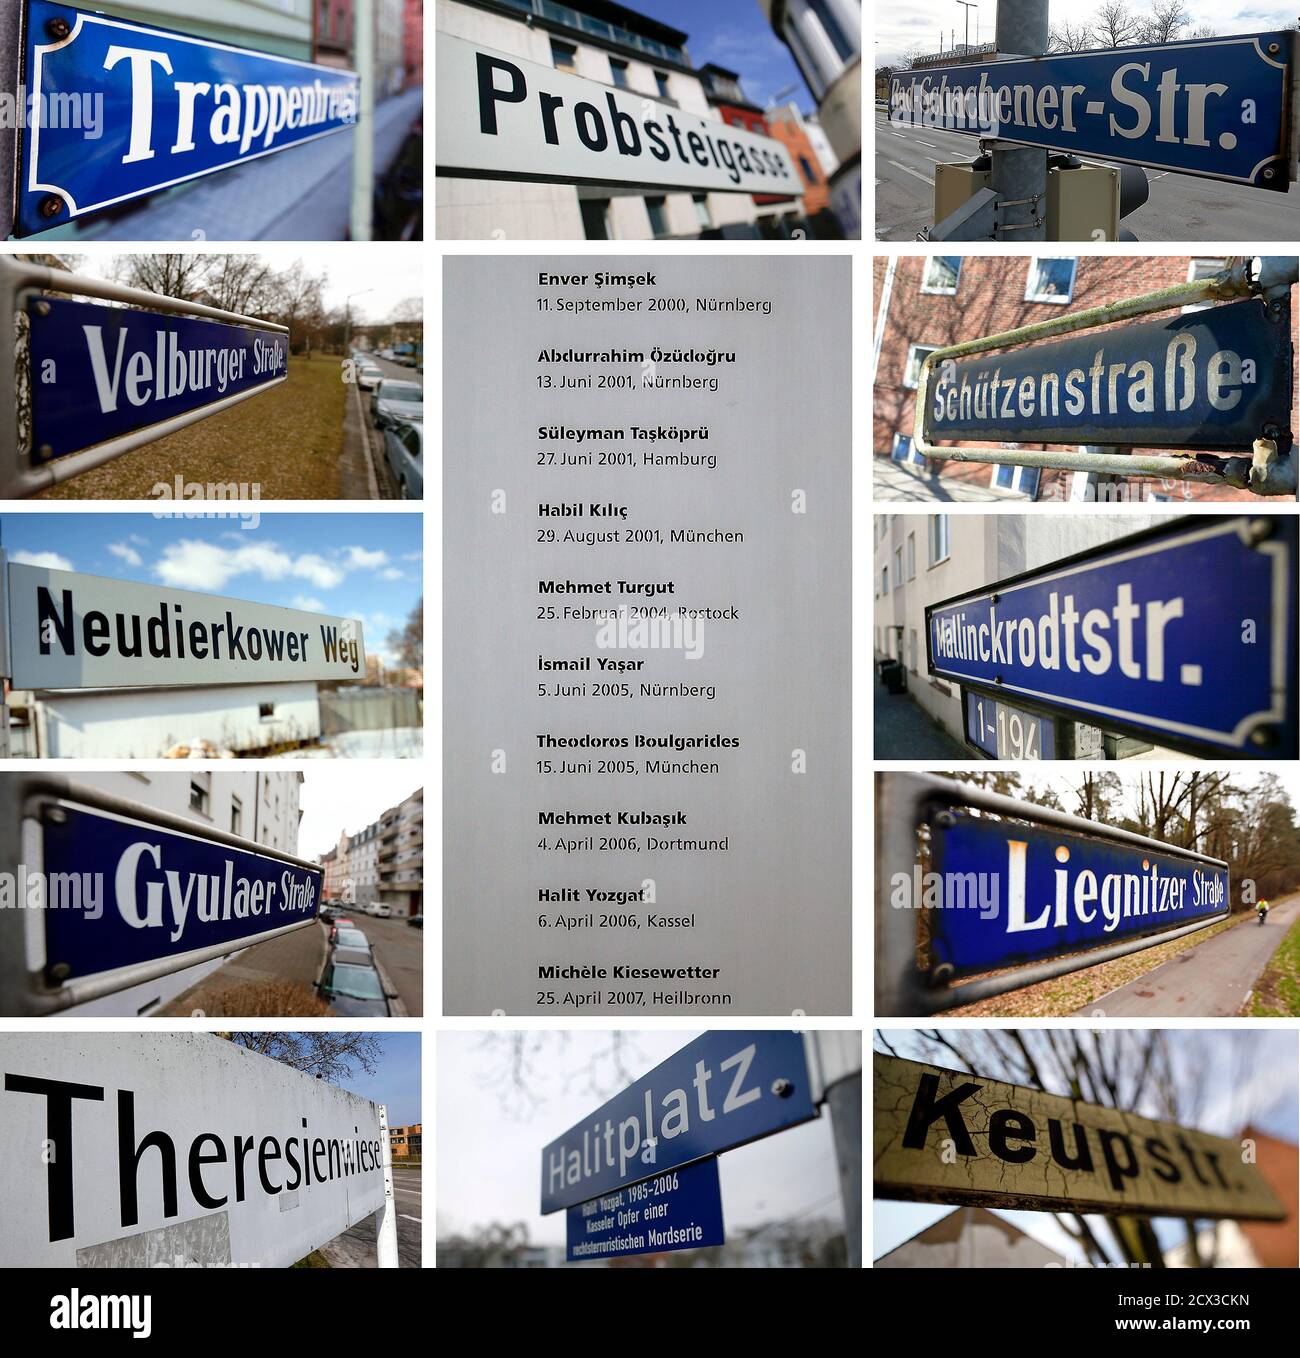 A combination picture shows a memorial (C) to commemorate the victims of the neo-Nazi group National Socialist Underground (NSU), a sign marking a square named after victim Halit Yozgat (lower C) and street signs in the cities of Dortmund, Nuernberg, Hamburg, Munich, Rostock, Kassel and Heilbronn where the NSU carried out their attacks. An alleged member of the NSU, 38-year-old Beate Zschaepe, will go on trial in Munich in April 17, 2013, charged with the murders. The NSU is accused of murdering nine Turkish and Greek immigrants and a policewoman from 2000 to 2007. Two other NSU members commit Stock Photo